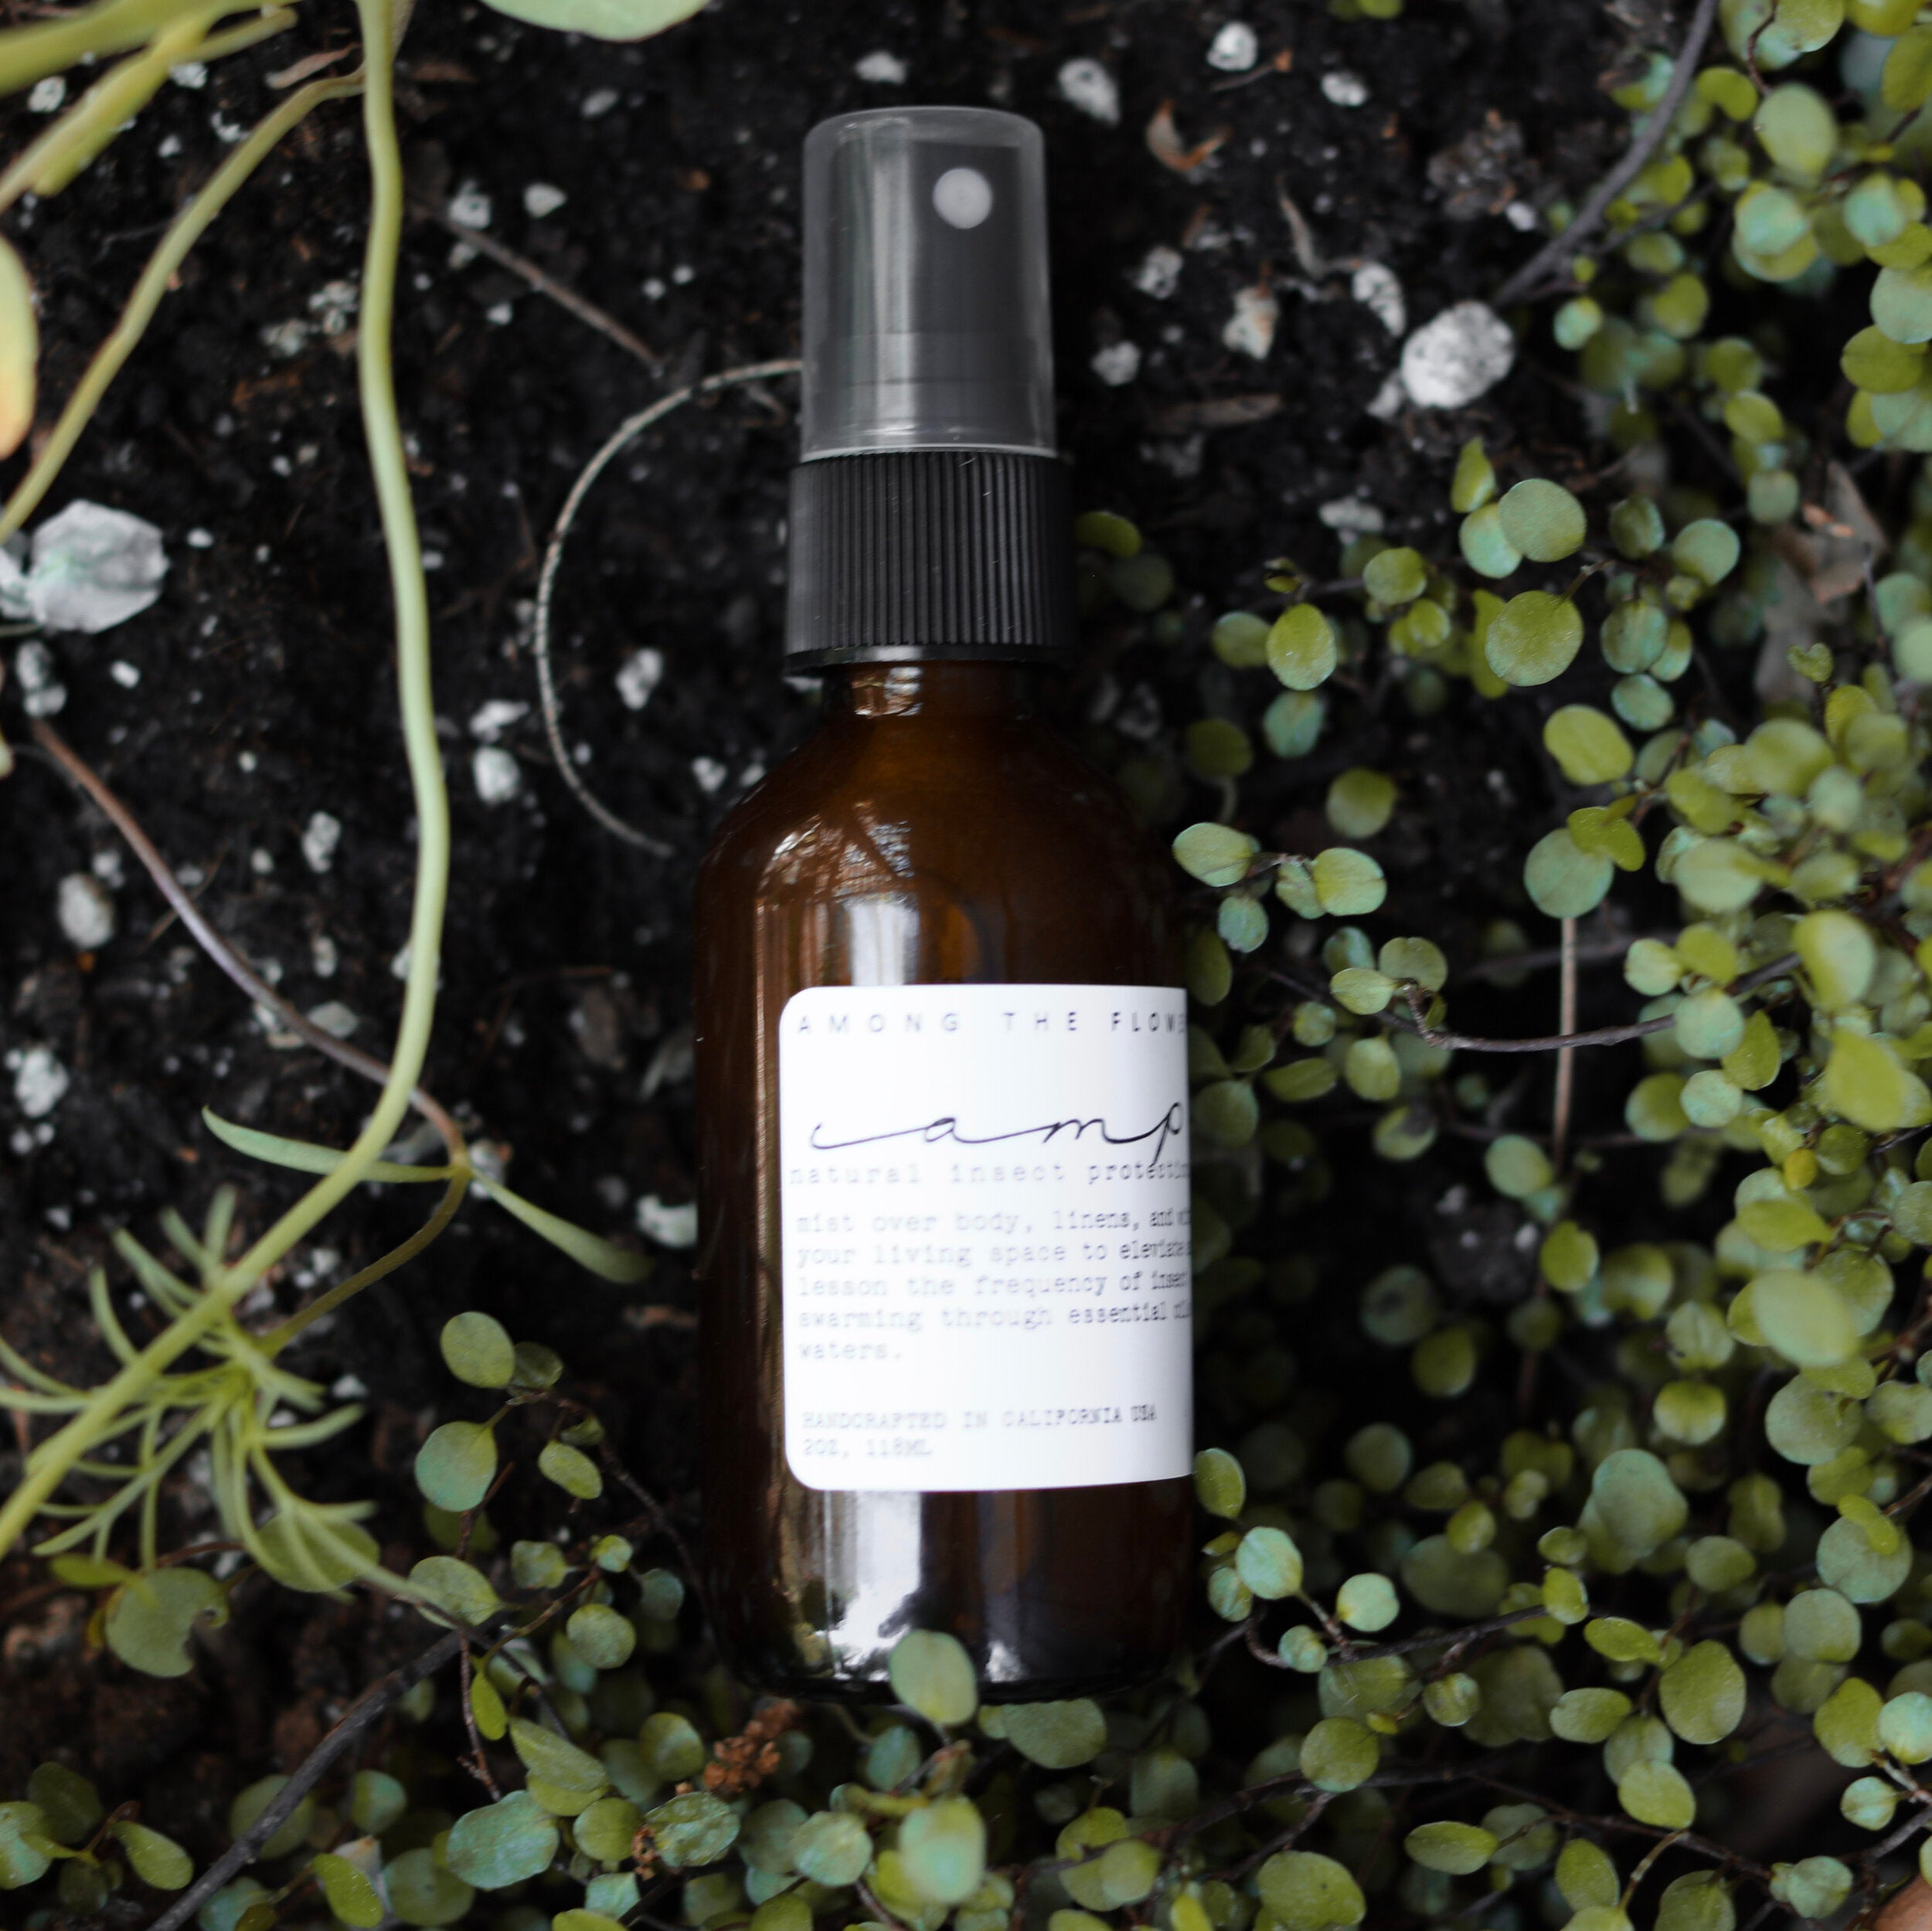 Essential oil and non-toxic Camp Mist Insect Shield by Among the Flowers in amber spray bottle with black lid and white label. Microgreens and soil background.